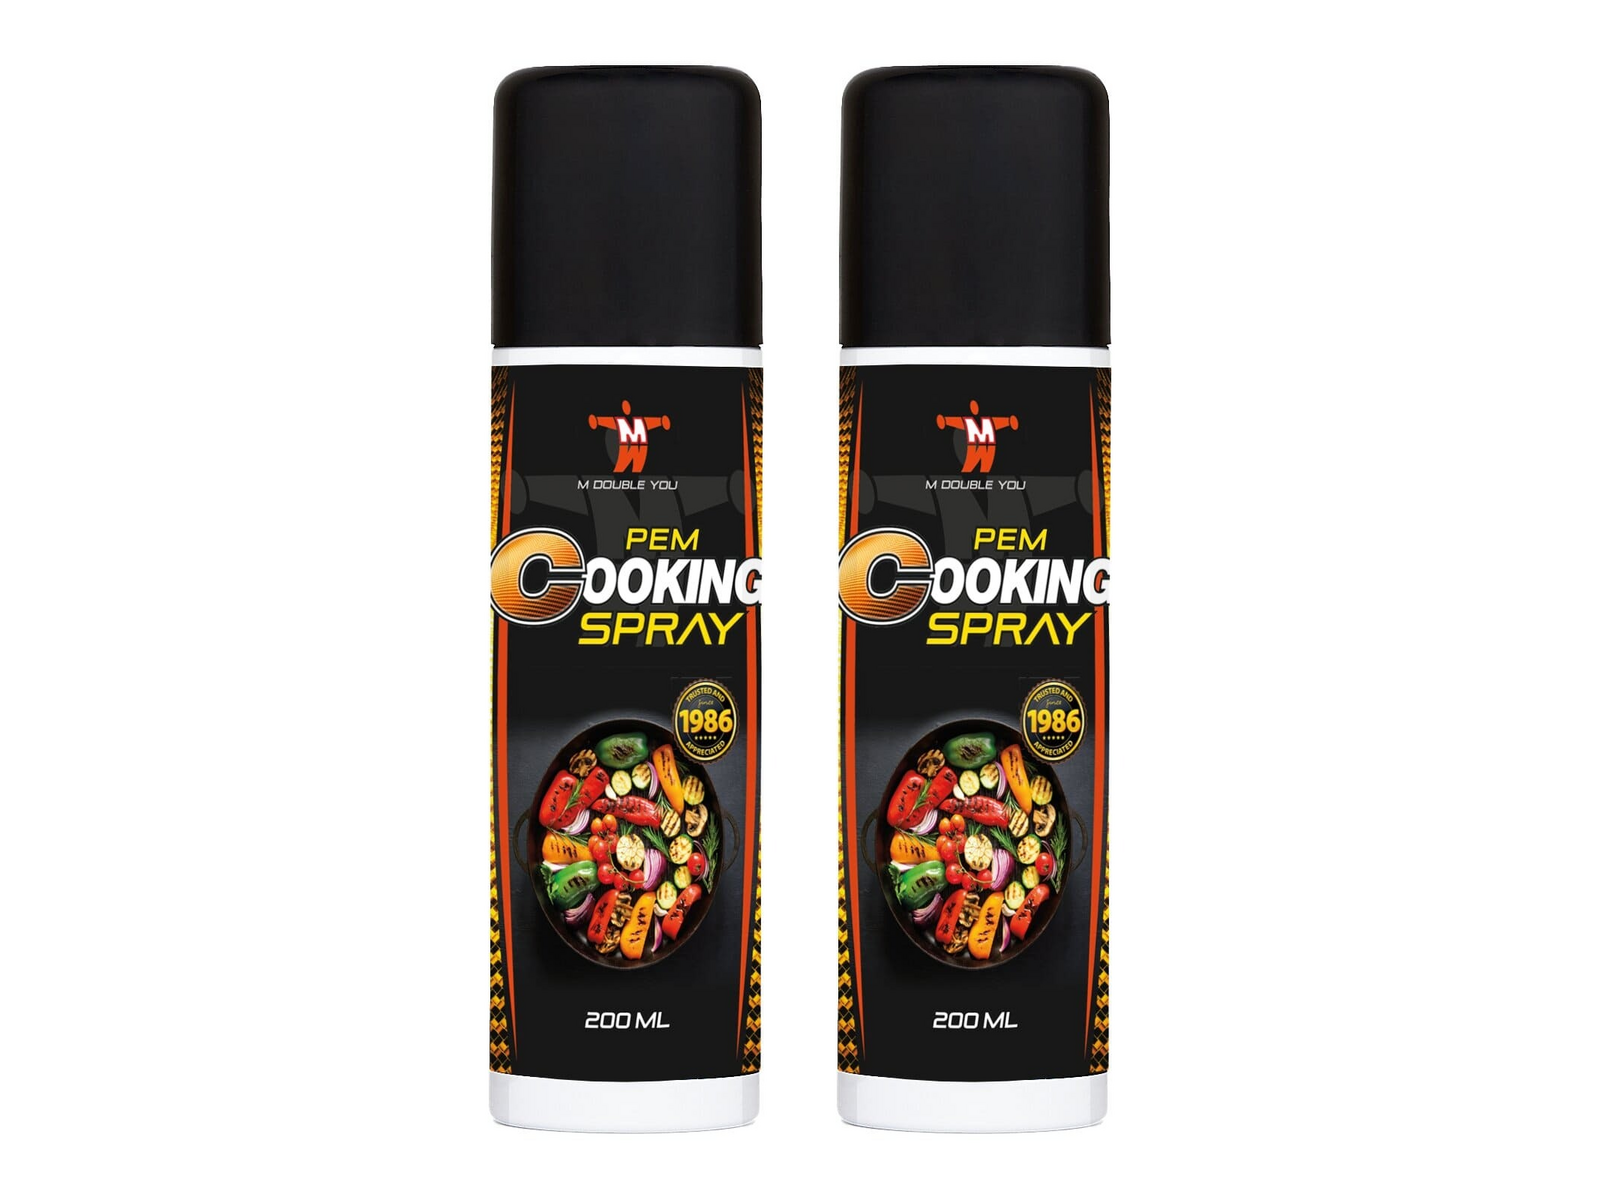 PEM Cooking spray (200 ml - 2-pack) - M DOUBLE YOU